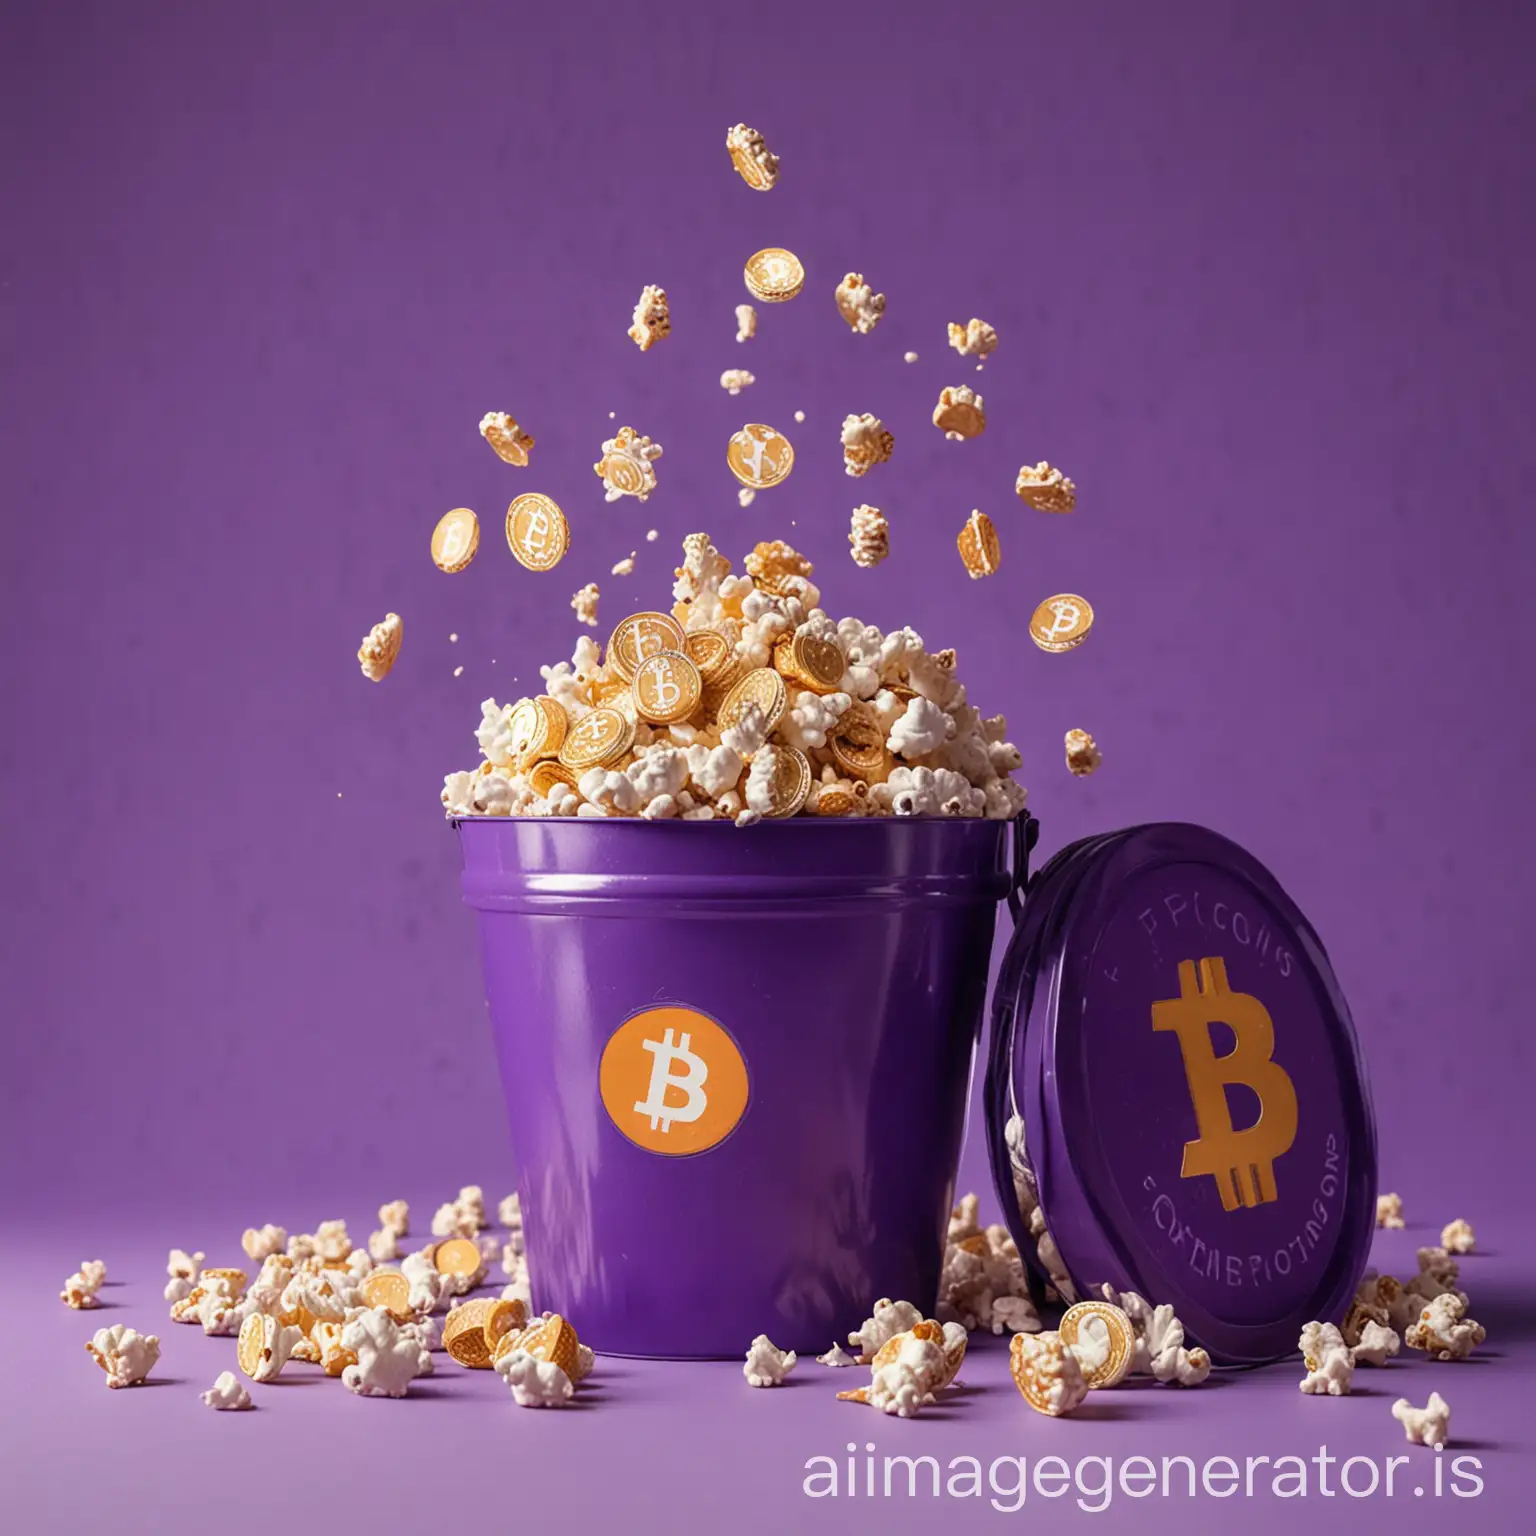 the small and big sizes of bitcoins are inside a popcorn buckets, in purple studio background, some bitcoins are suspended in atmosphere